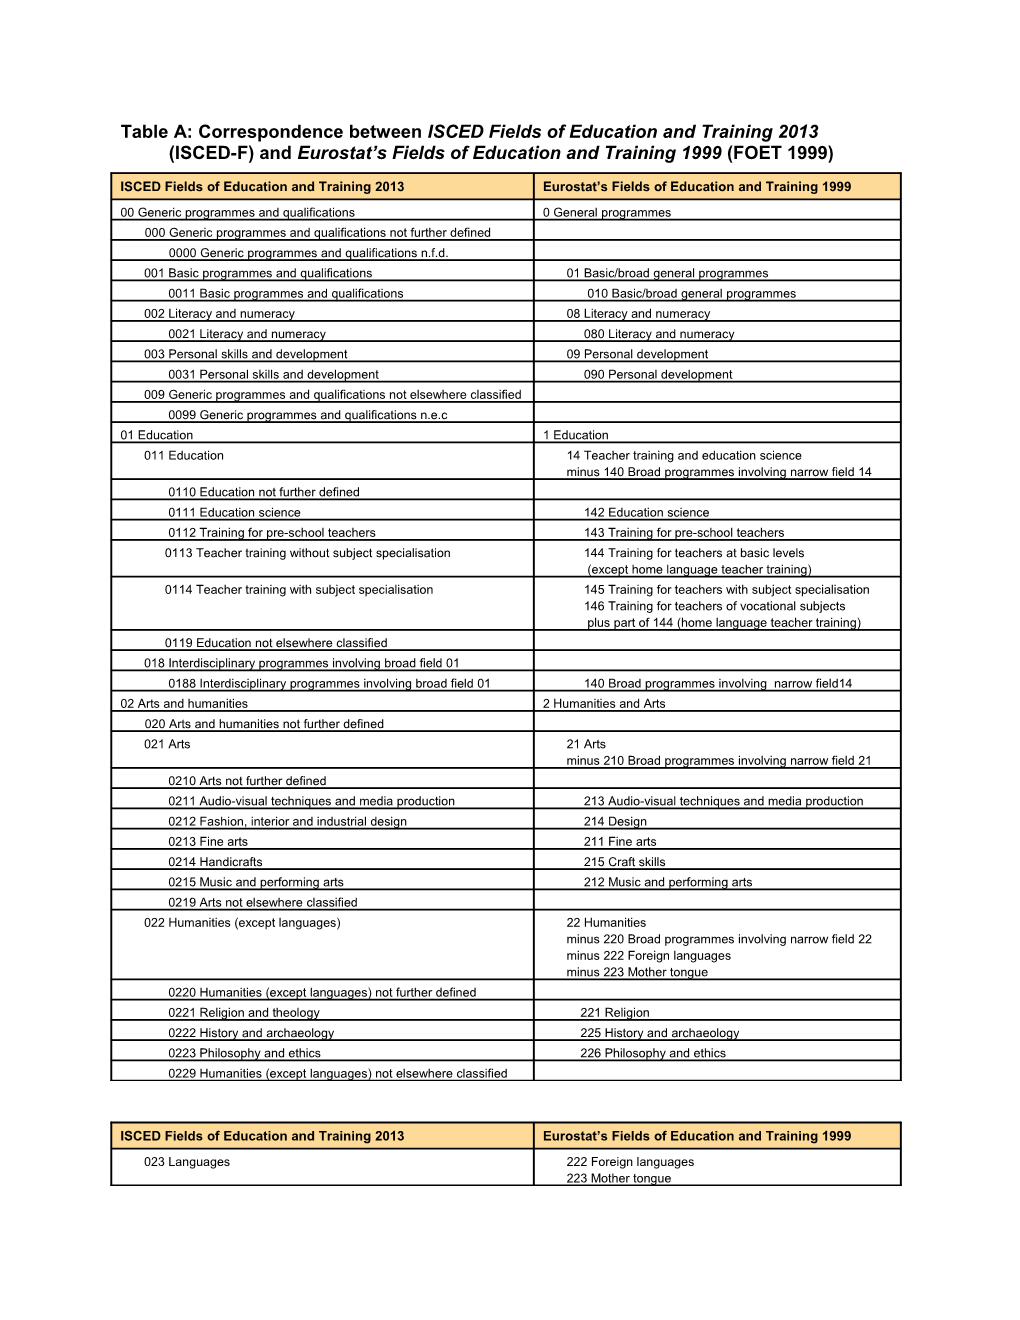 Table A: Correspondence Between ISCED Fields of Education and Training 2013(ISCED-F) And